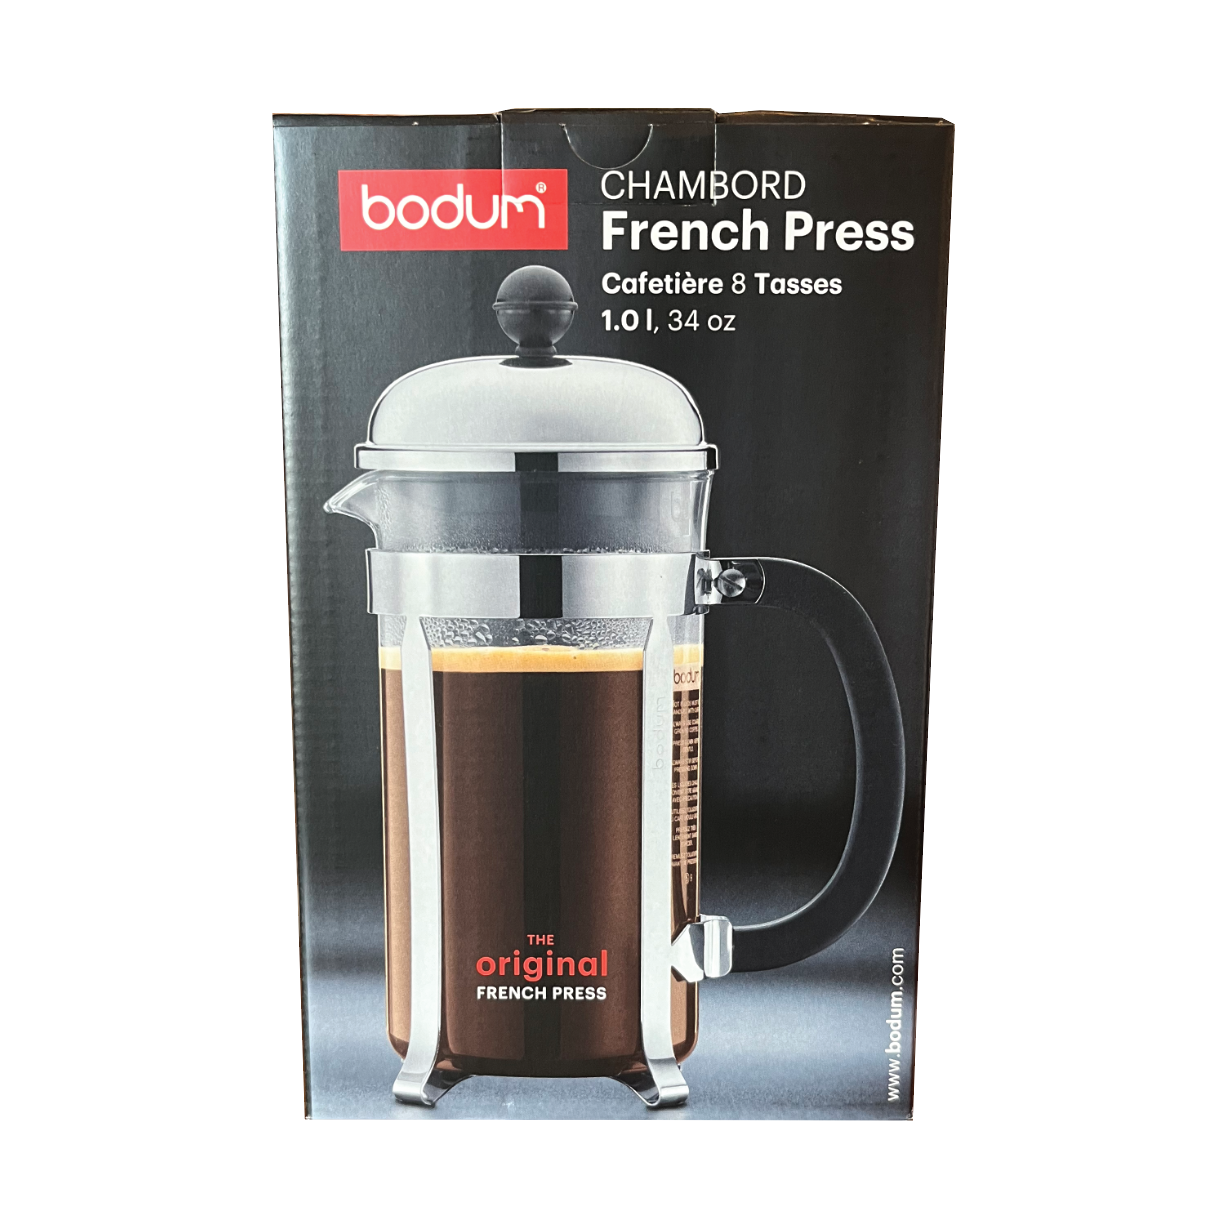 Picture Bodum Charmbord French Press, 8 Cup Coffee Maker